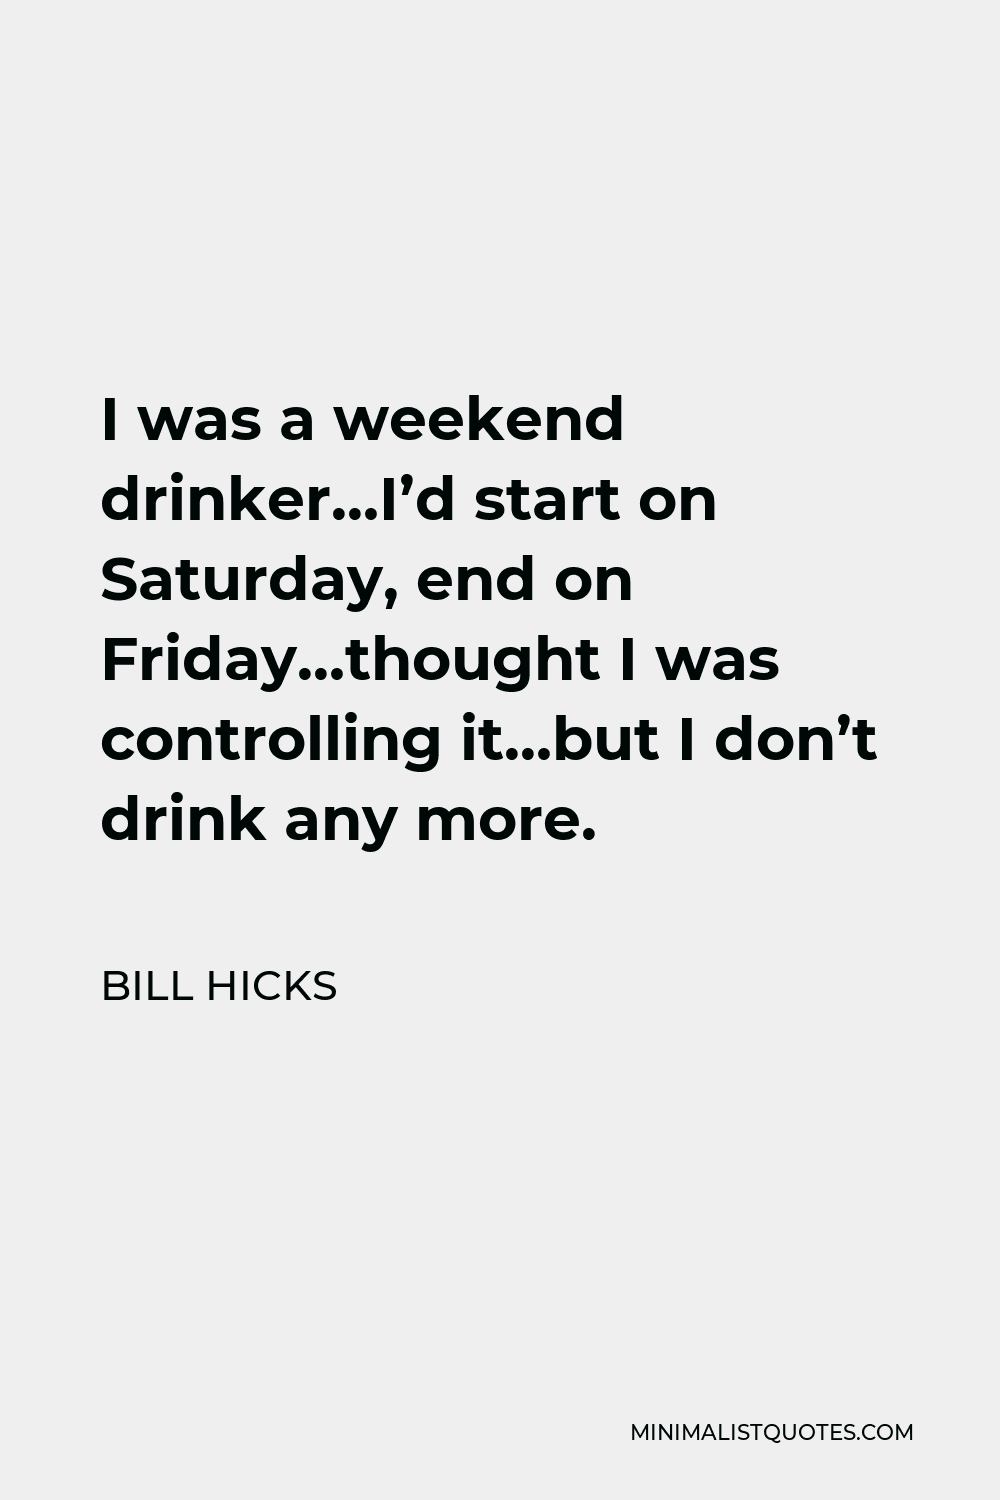 Bill Hicks Quote: I was a weekend drinker...I'd start on Saturday, end ...